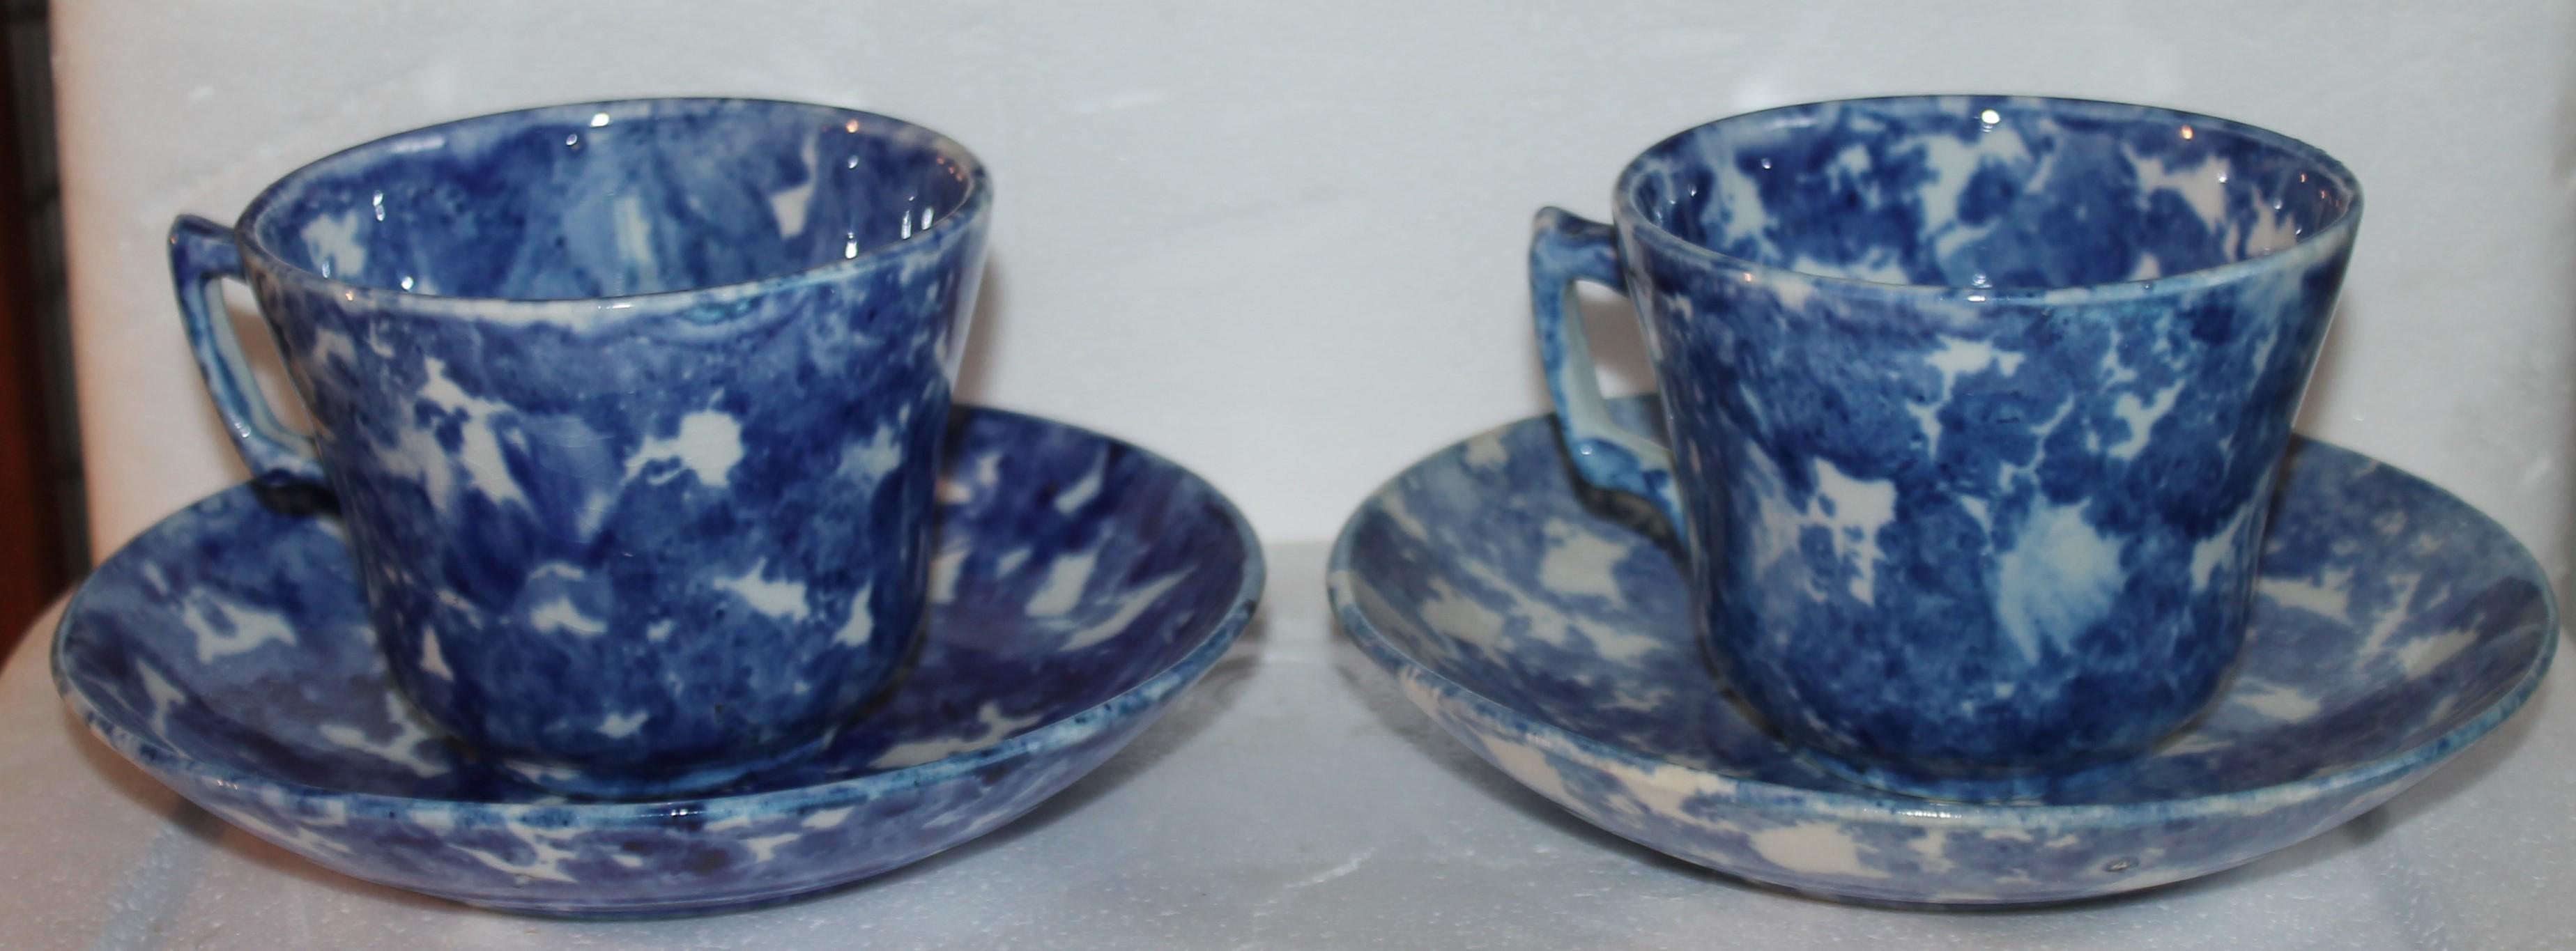 Adirondack 19thc Sponge Ware Cup and Saucers, Set of Four For Sale